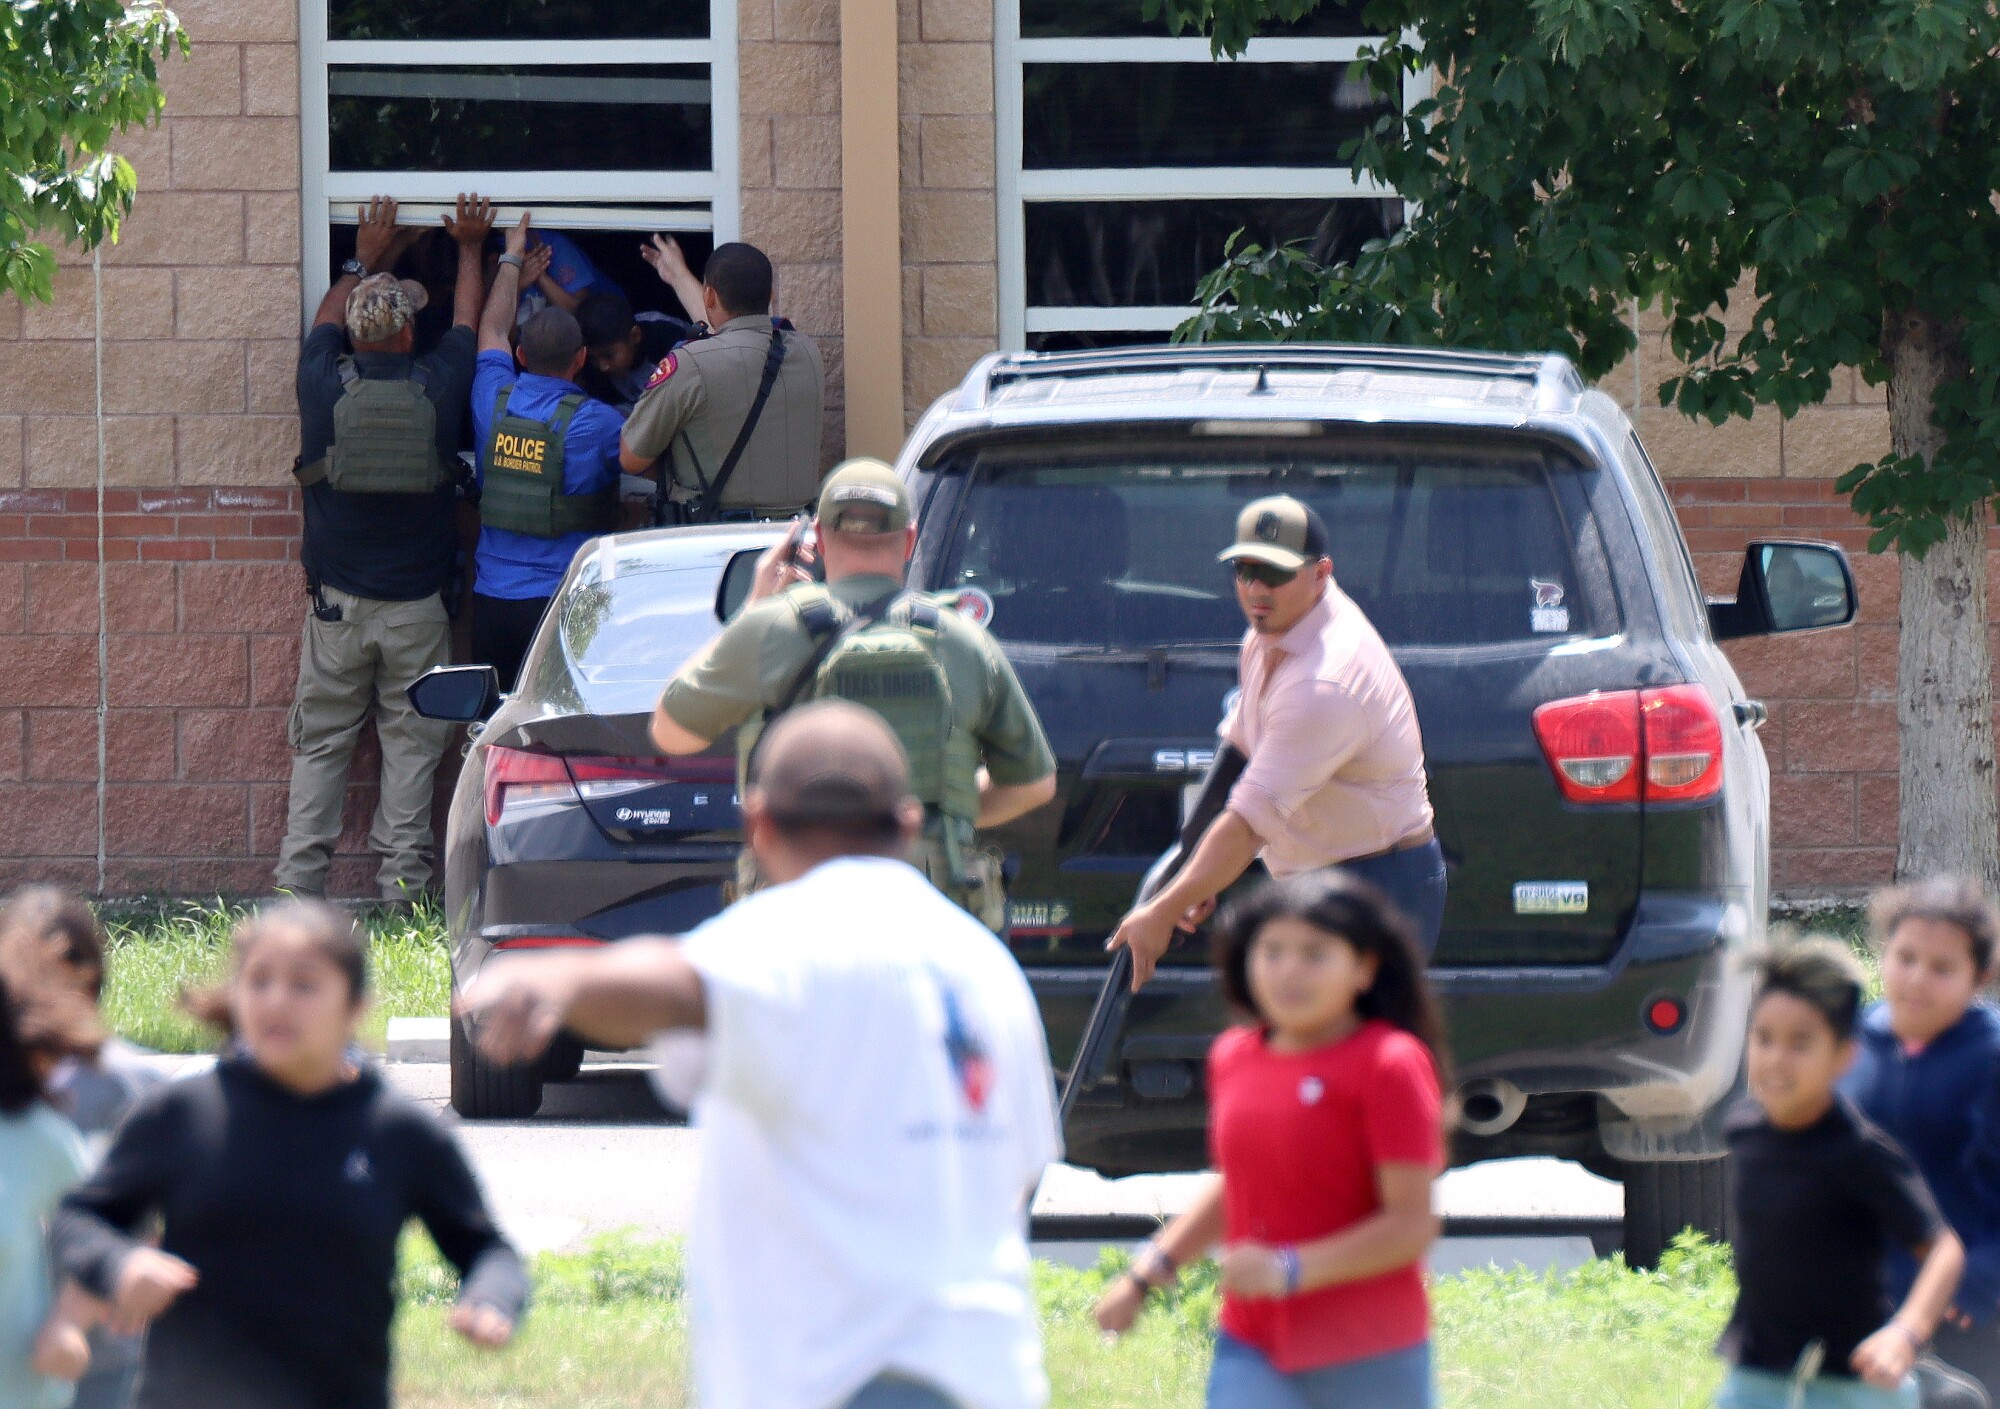 Officers with guns drawn are scene outside Robb Elementary School as students are evacuated out of windows.